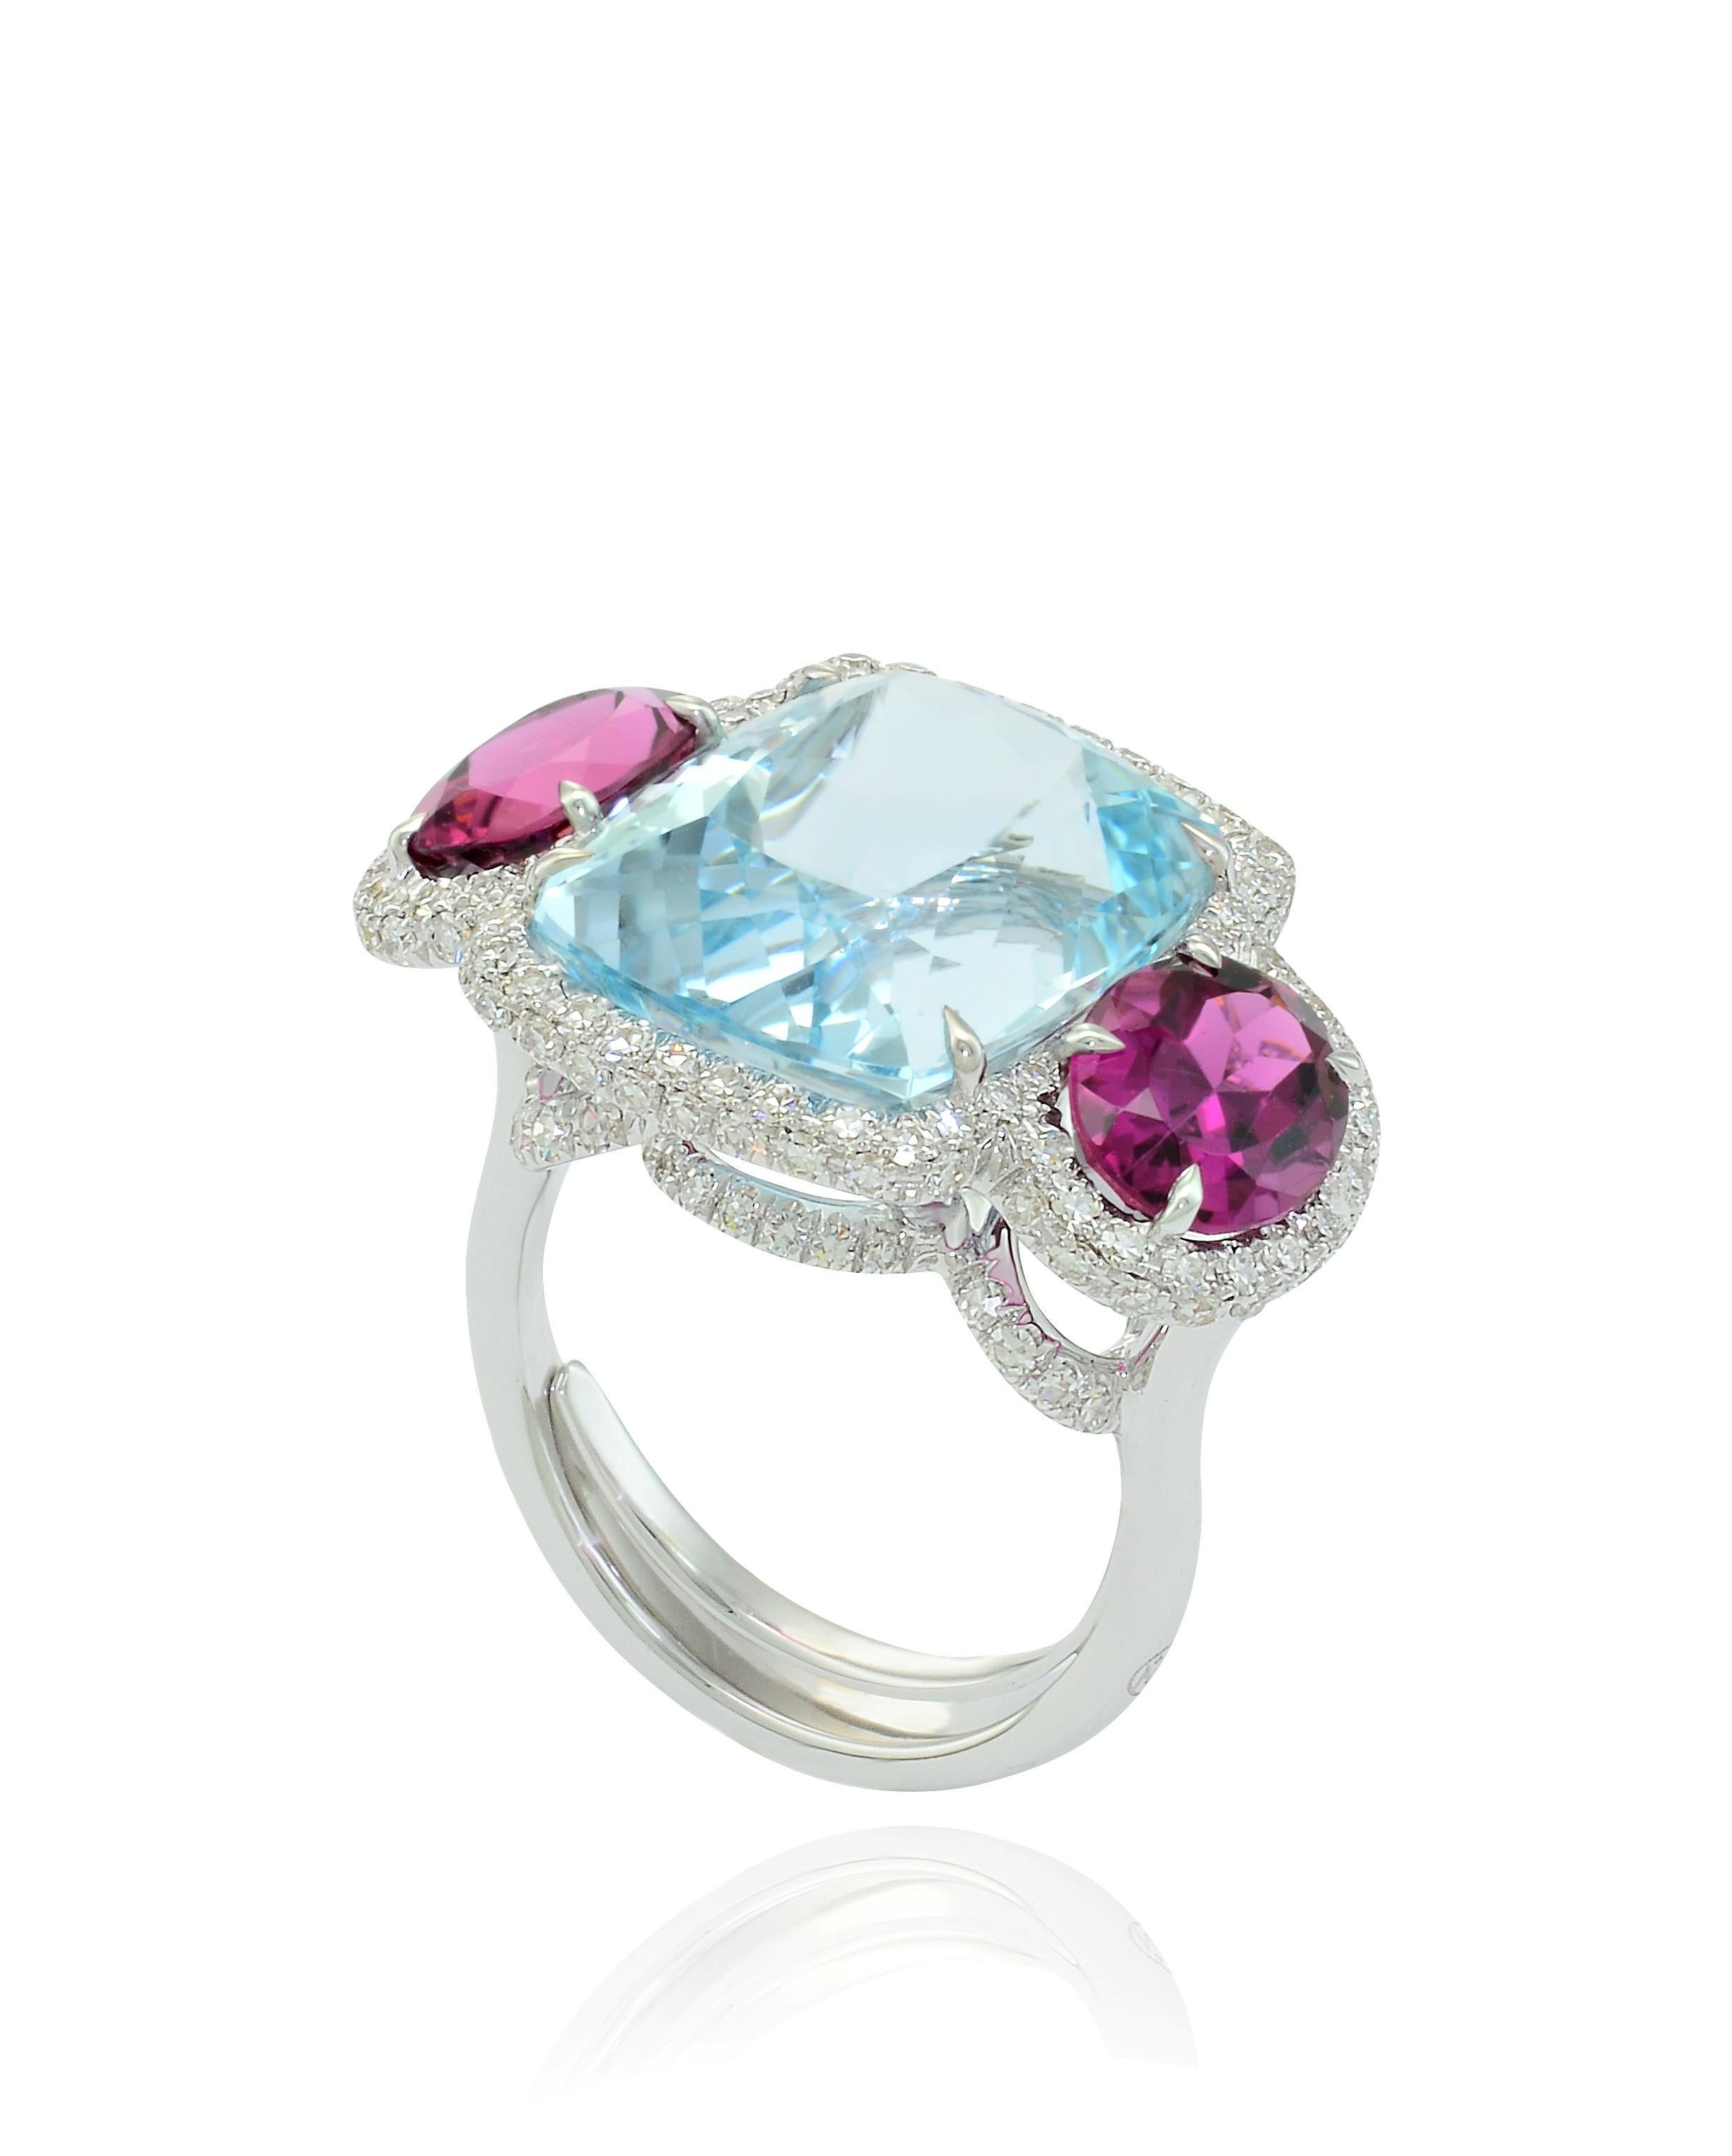 Enchanting 3 stones ring, handcrafted in Italy, in Margherita Burgener workshop.

aquamarine total ct 14.44
2 oval natural pink tourmalines  ct 3.82
18 kt white gold  grams 9.23 
129 diamonds  total carat 1.02

US Size US 6¾ - European size 53